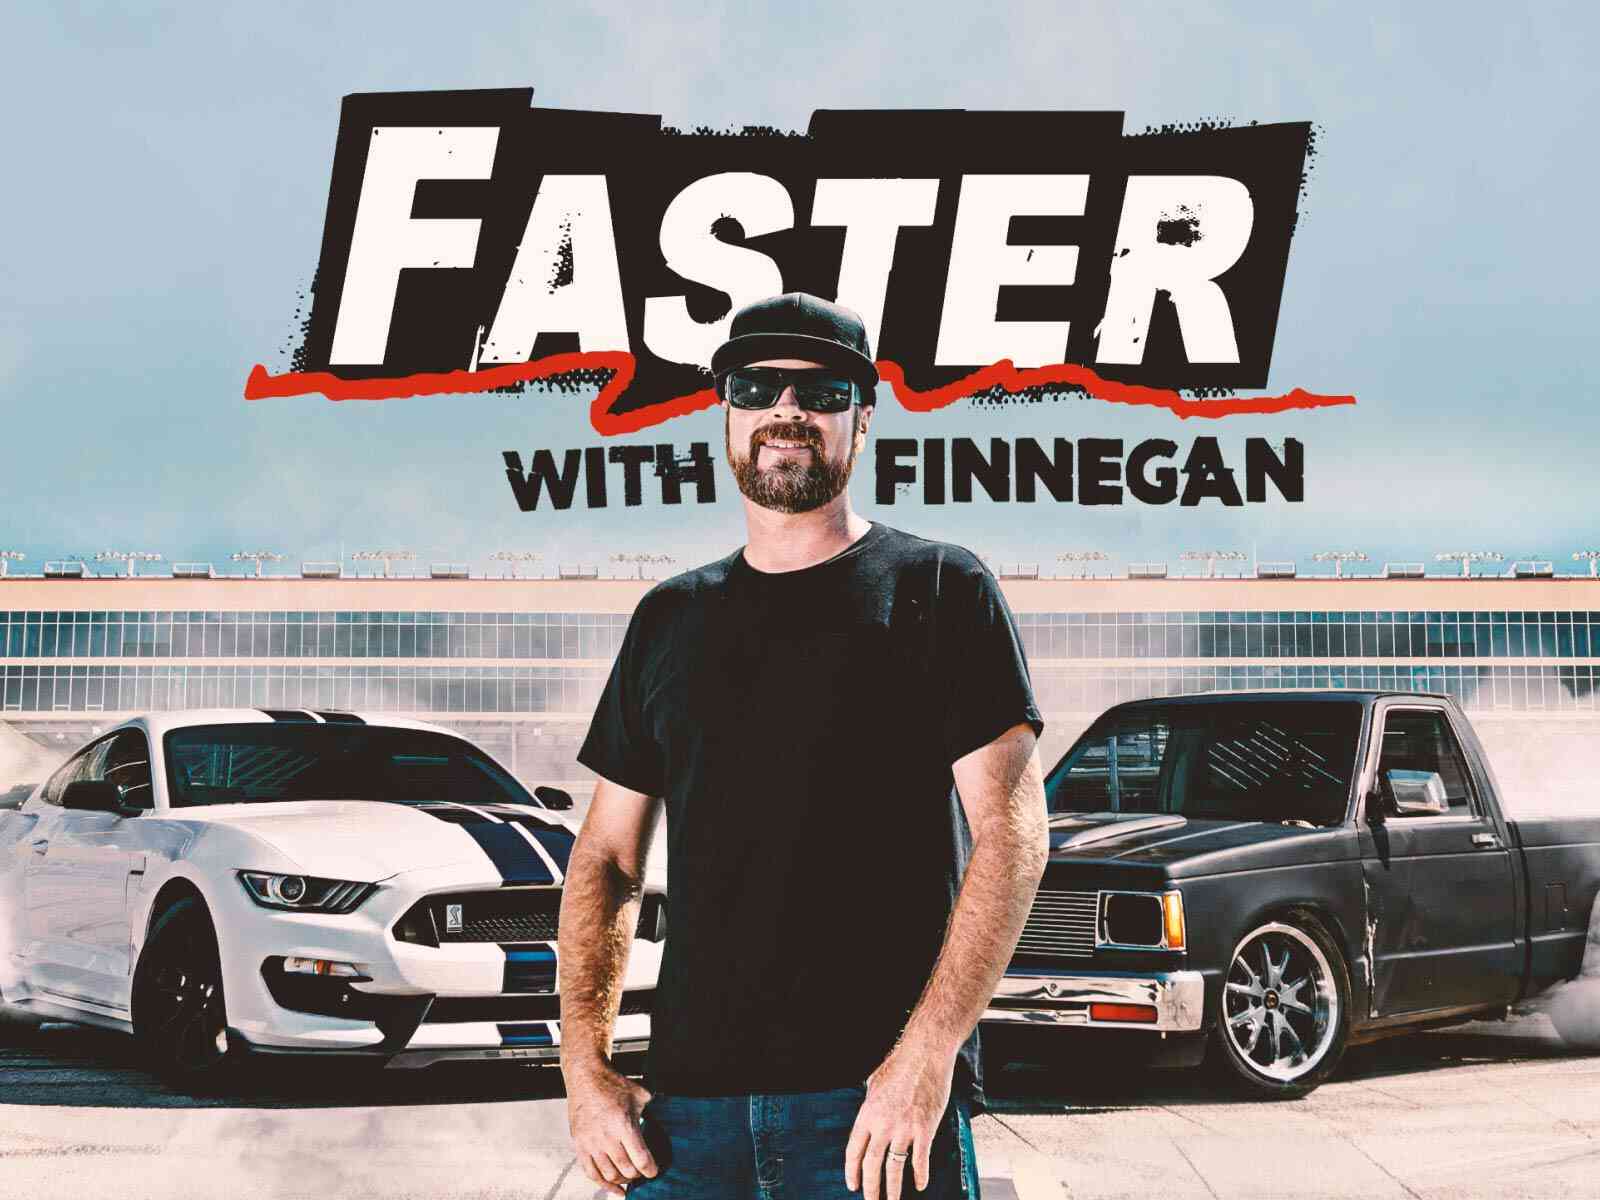 Image of Faster With Finnegan